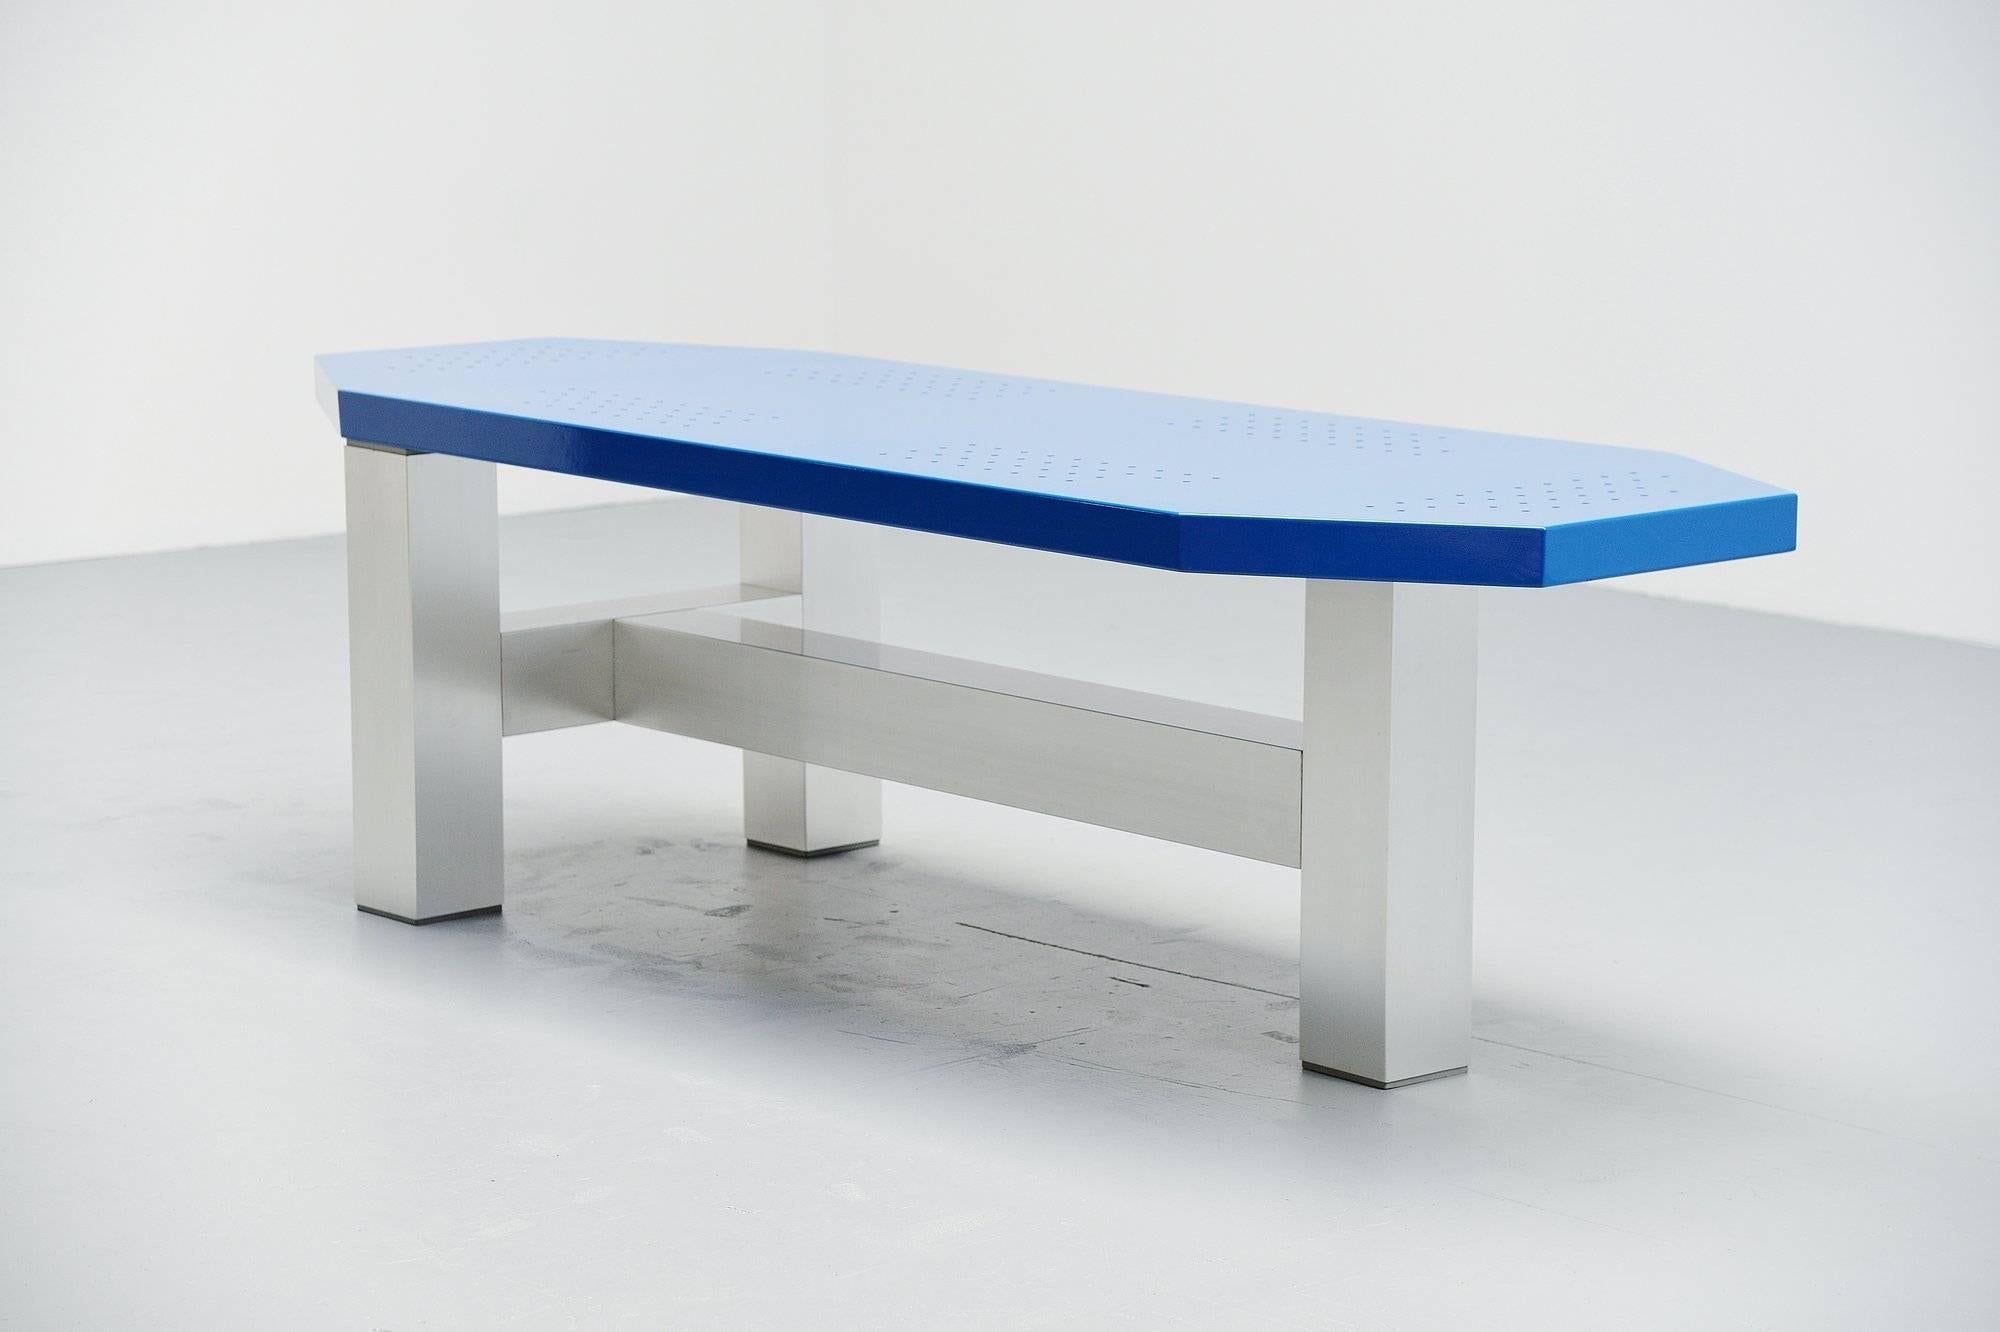 Rare modernist table designed by Martin Visser and Joke van der Heyden, manufactured by ’t Spectrum Bergeyk 1988. This table is model number TE20 which is the largest size and it has an aluminium base and a blue cold-painted top with die cut dot